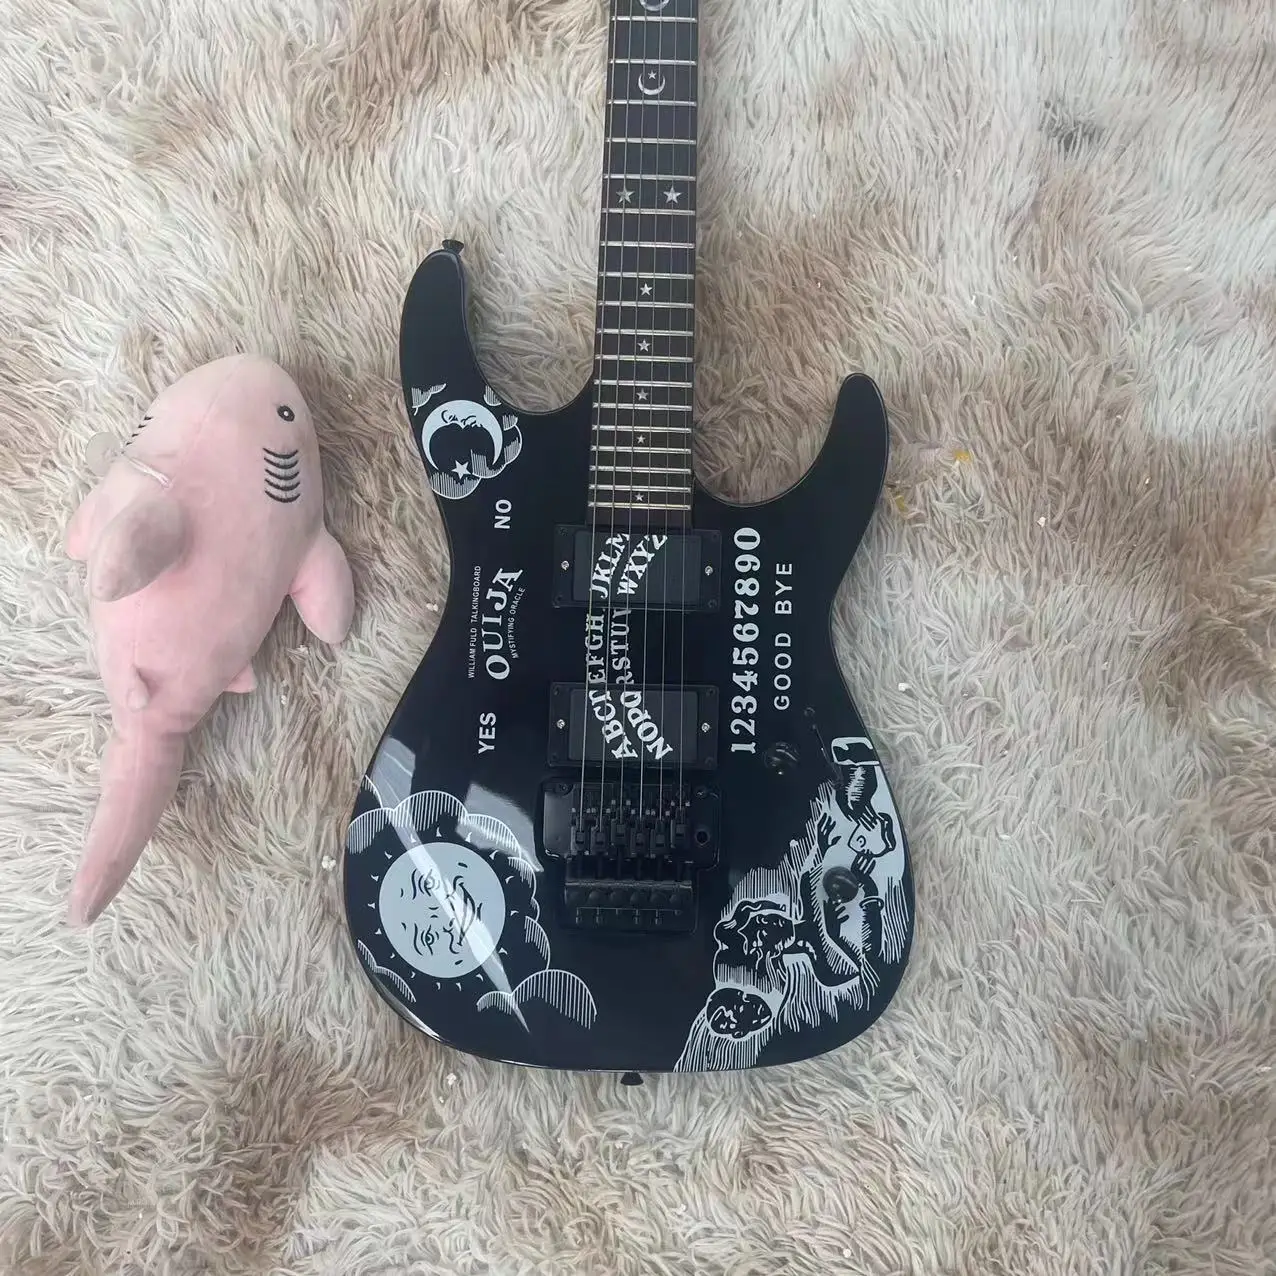 

Moon Goddess KH202 all-in-one electric guitar, black body with white painting, rose wood fingerboard, EMG pickup, tremolo dr